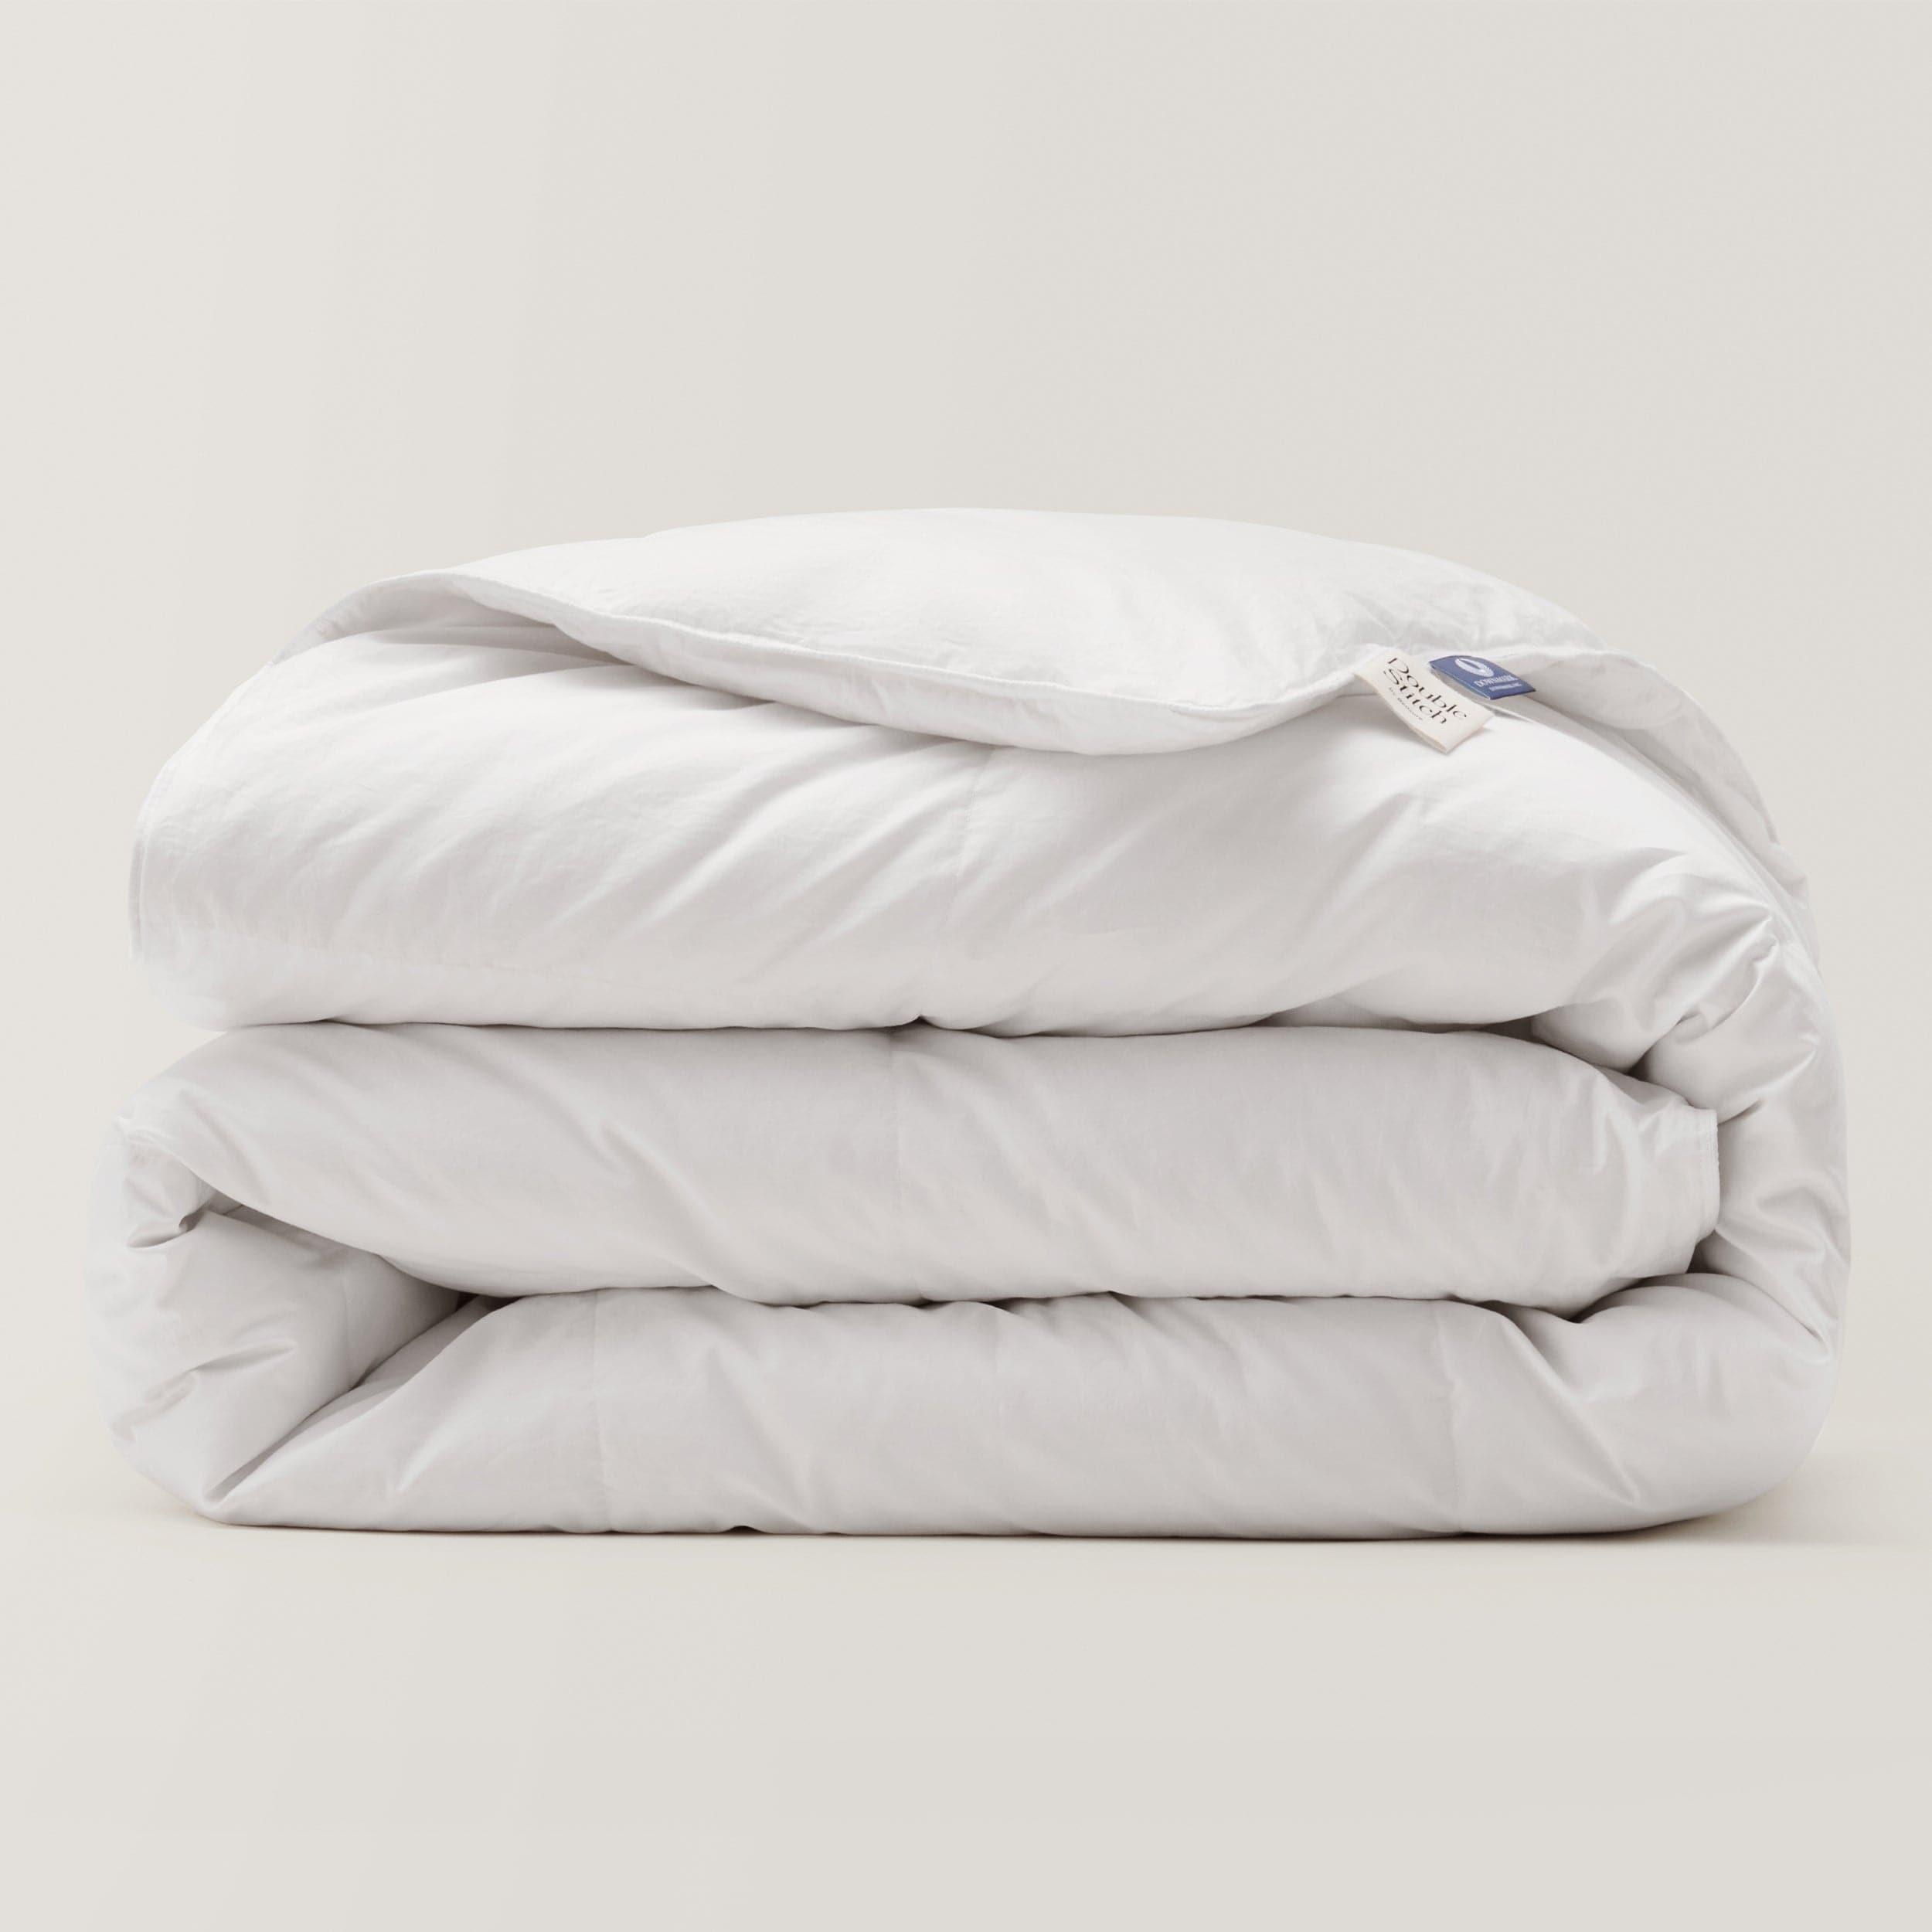 Experience ultimate comfort and luxury with our king duvet insert.